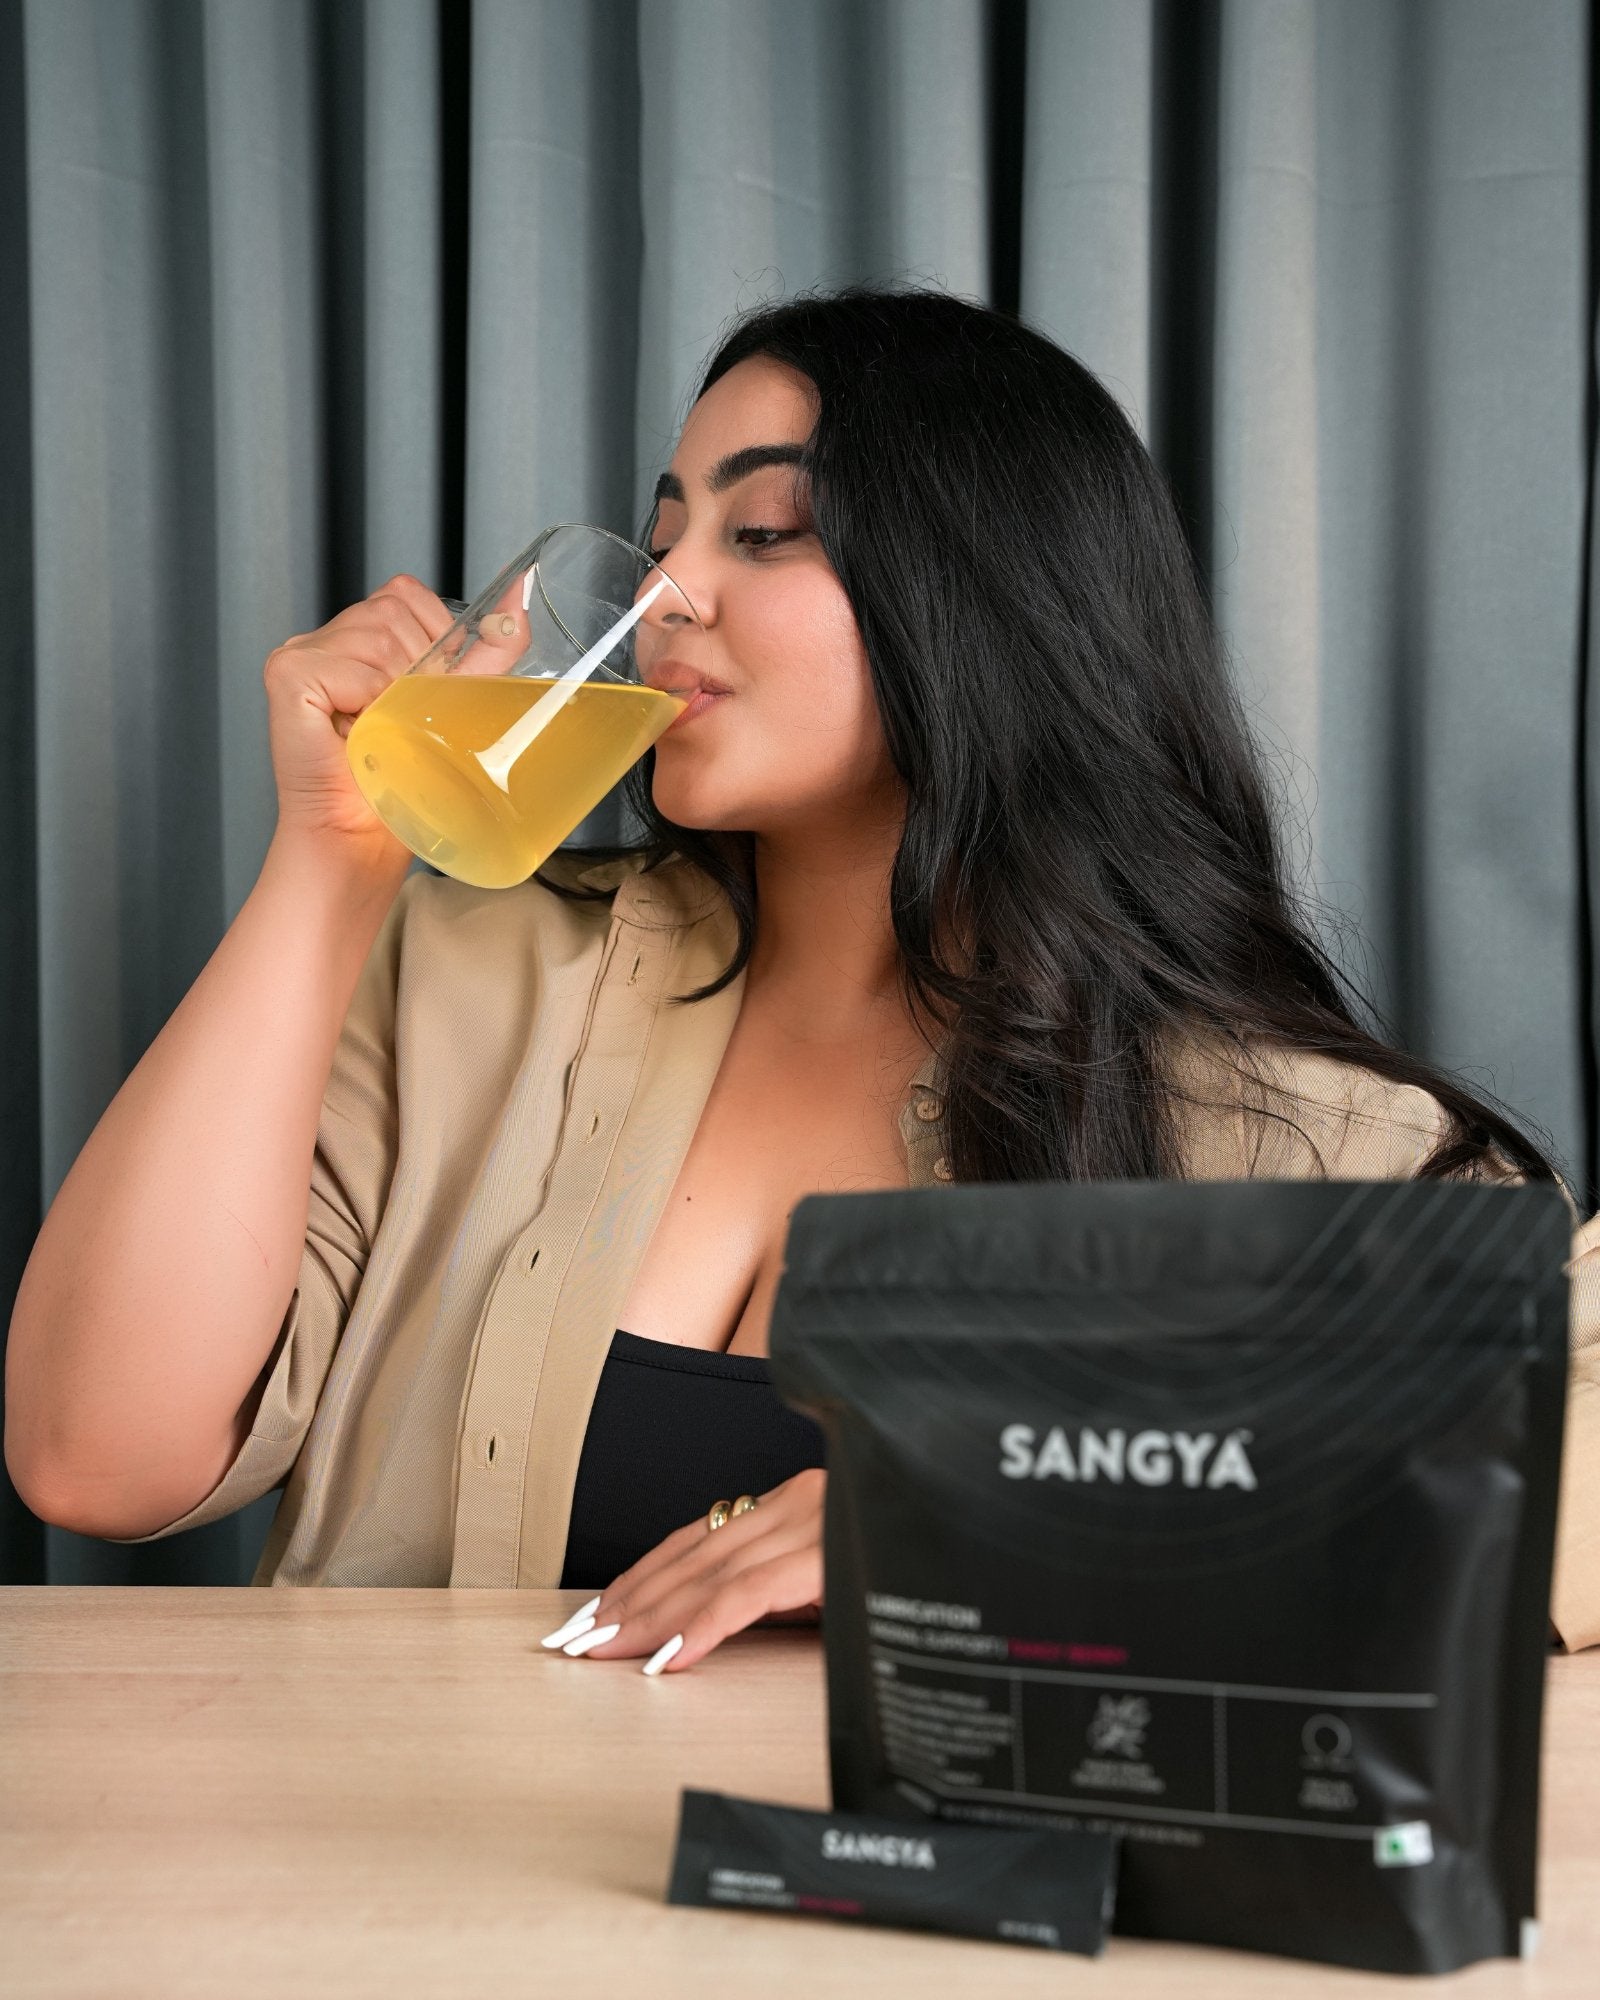 Sangya Lubrication Supplement - Discover Sensual Hydration with Sangya